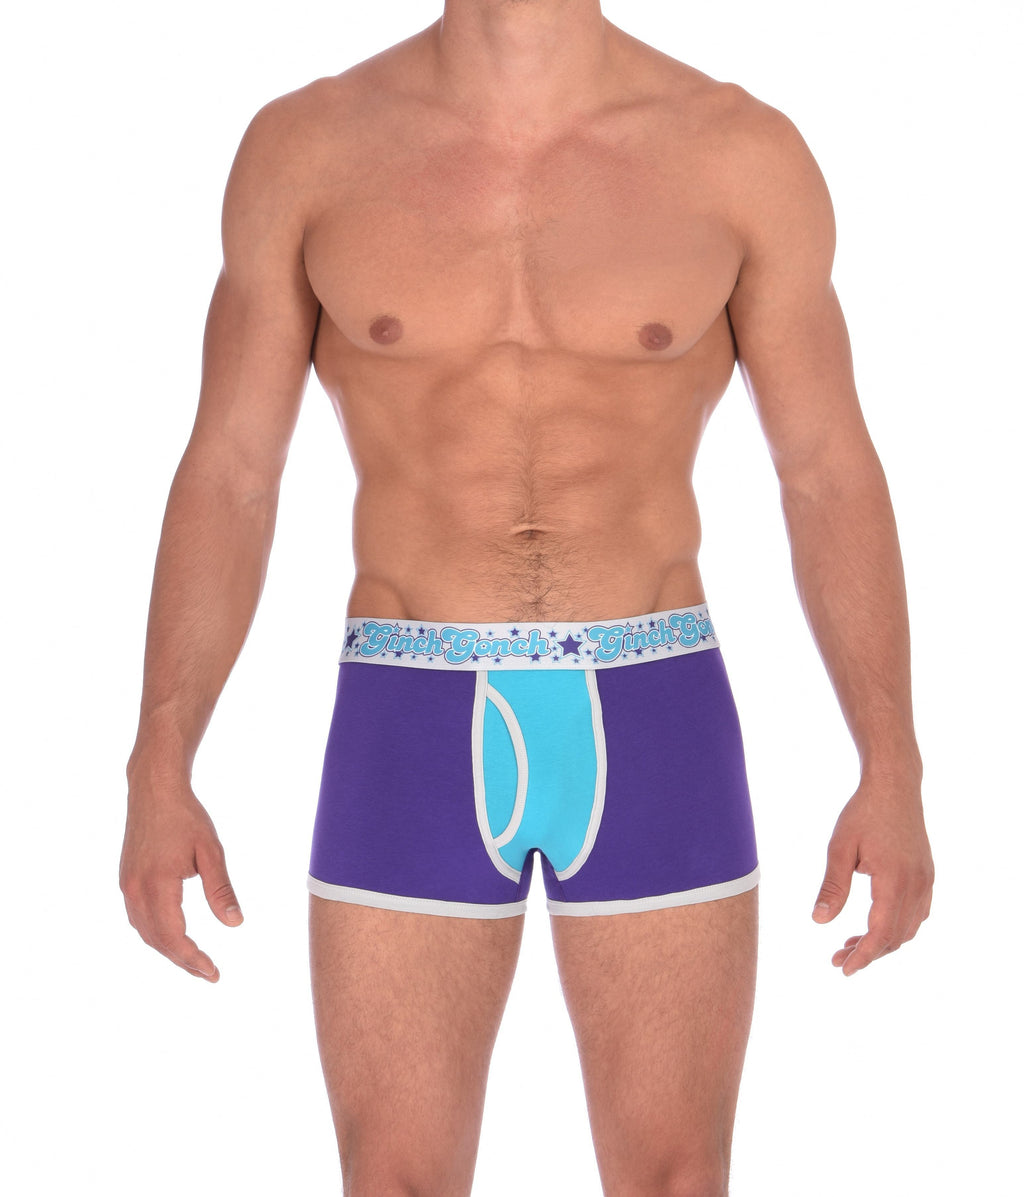 GG Ginch Gonch Purple Haze Trunk Boxer Brief y front - Men's Underwear purple and aqua panels with grey trim and silver printed waistband front 